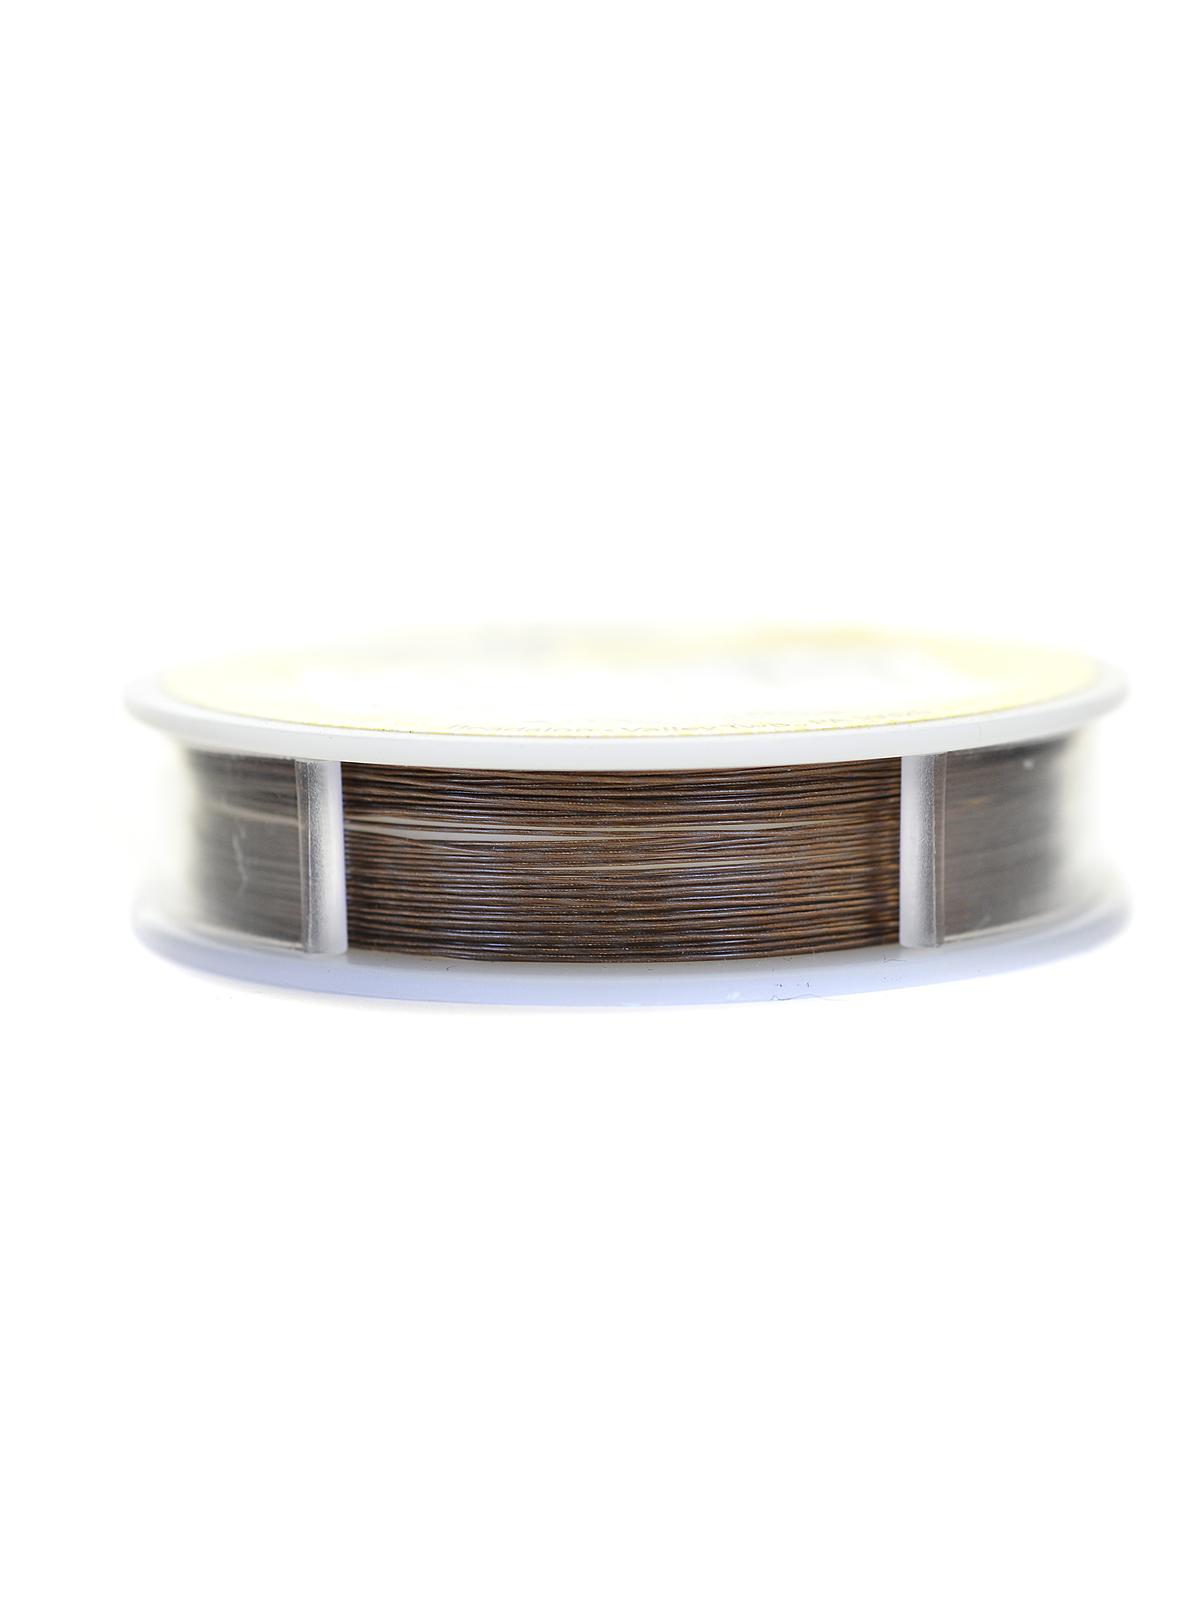 19 Strand Bead Stringing Wire Bronze .015 In. (0.38 Mm) 30 Ft. Spool